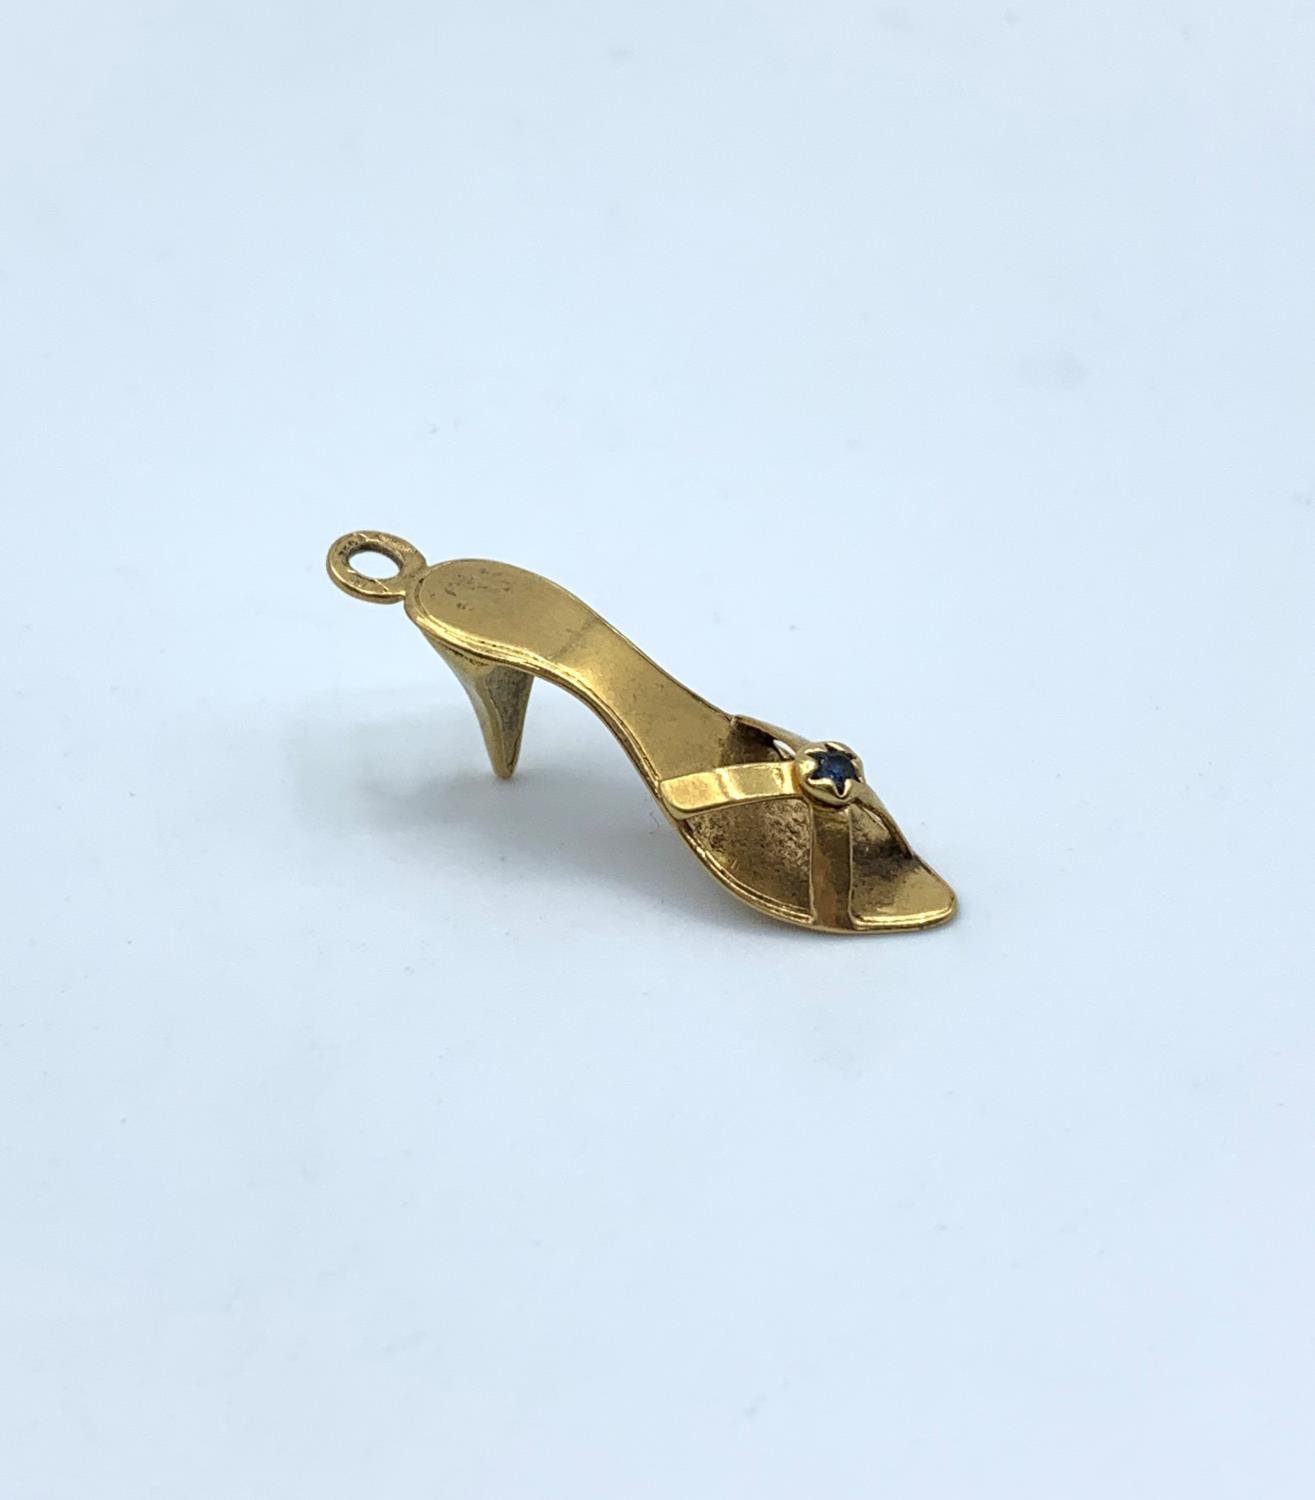 9ct Gold Shoe Charm/Pendant, weight 2.7g and 3cm long